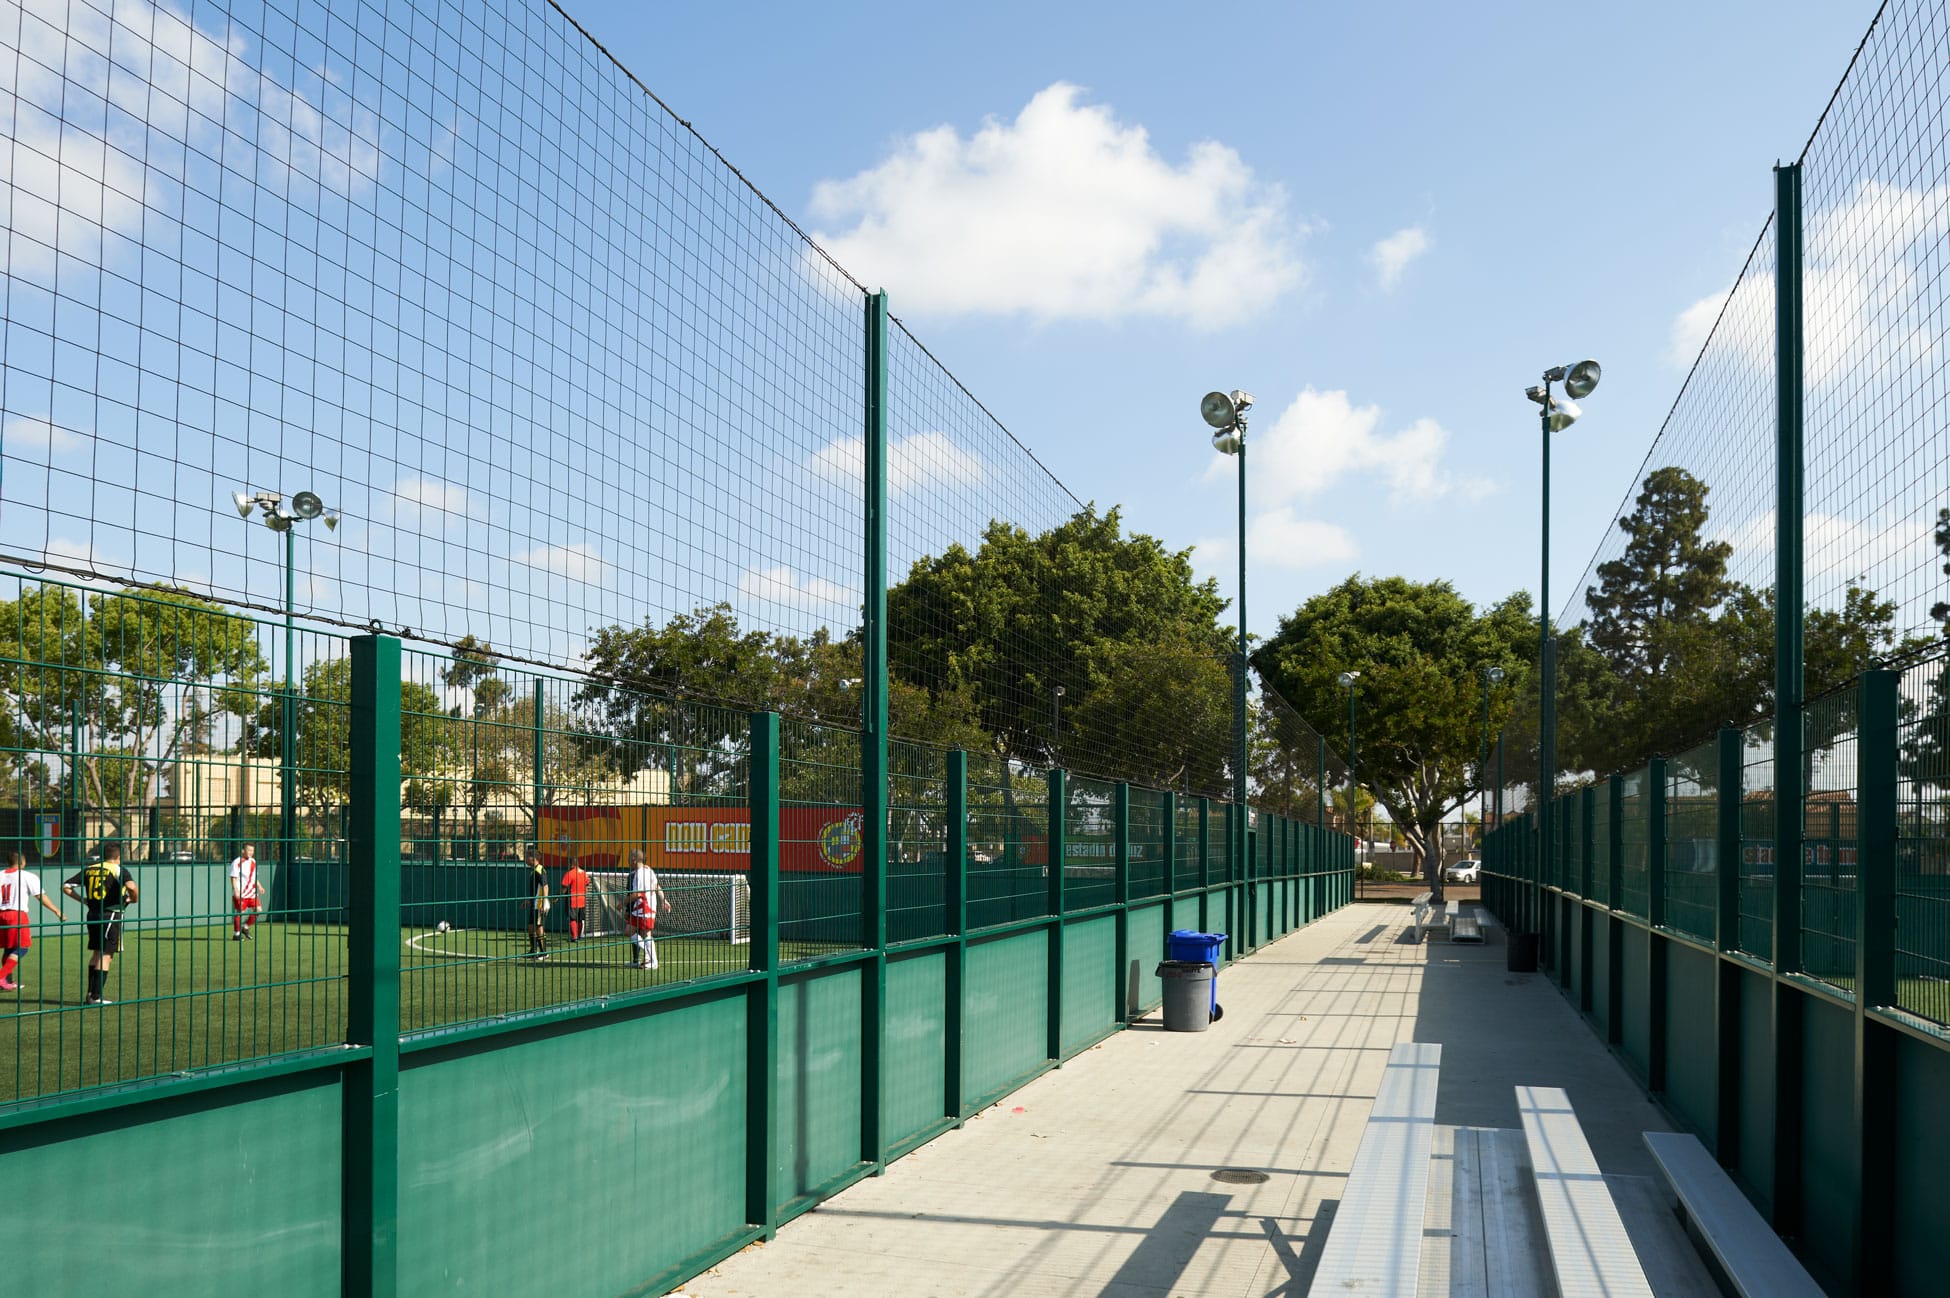 Kimley-Horn was selected to provide land development, transportation, and surface water services for the new Goals Soccer Center in South Gate, CA.